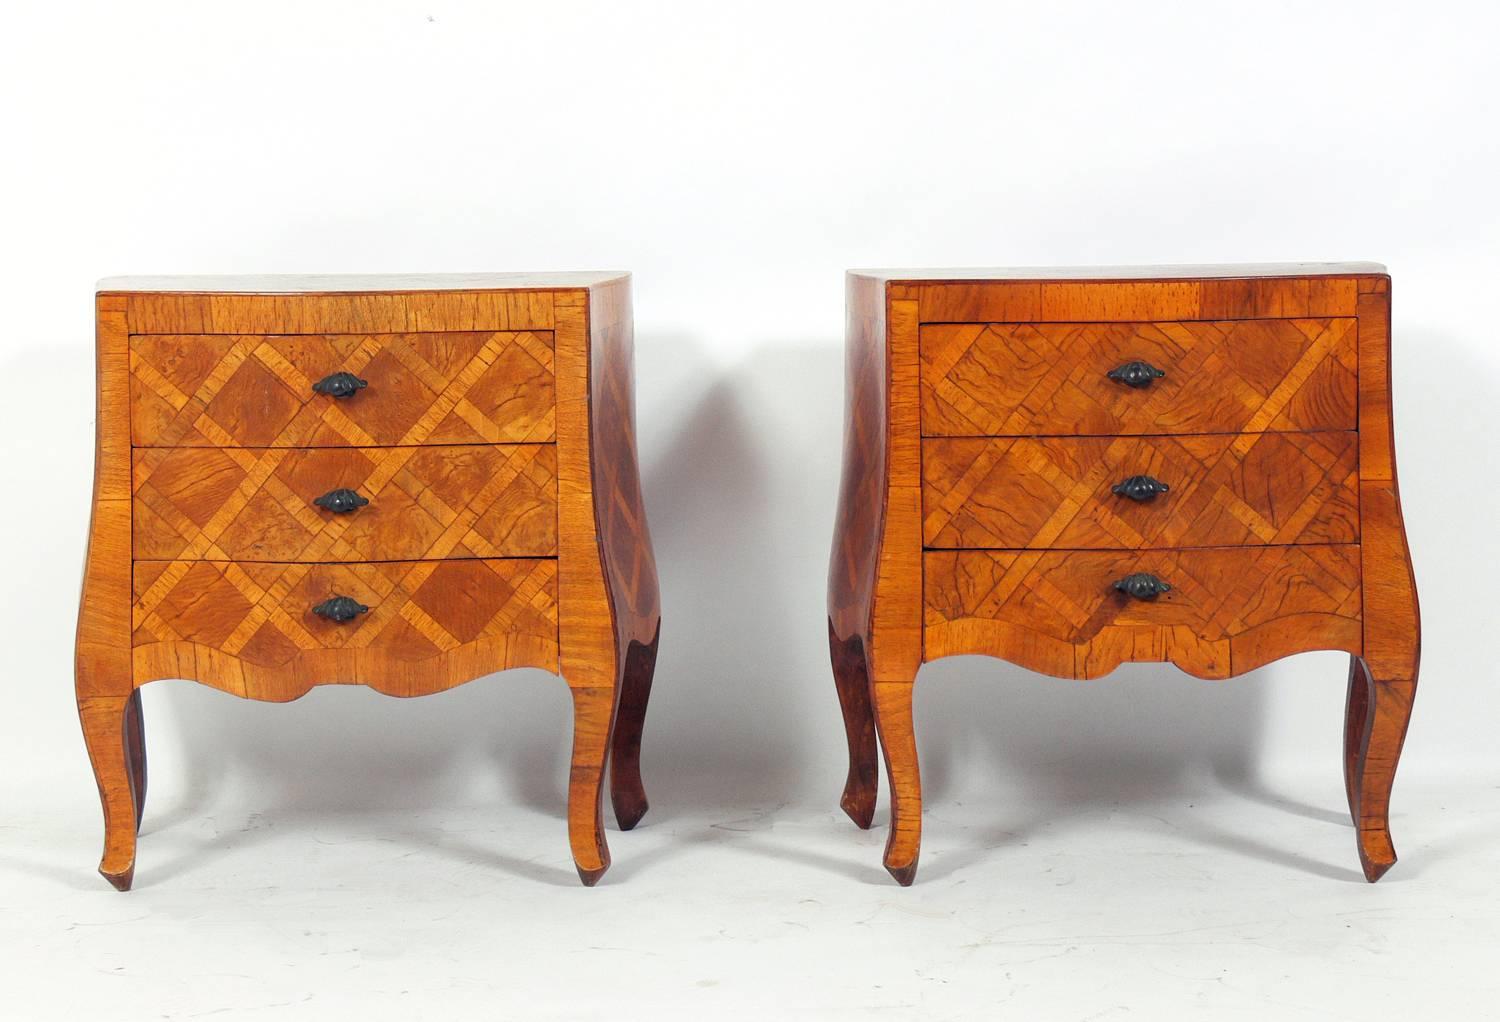 Pair of curvaceous Italian nightstands or end tables, Italy, circa 1950s. Beautiful marquetry and very nice quality, they are even finished on the back side if you'd like to float them in a room. They are a versatile size and can be used as night